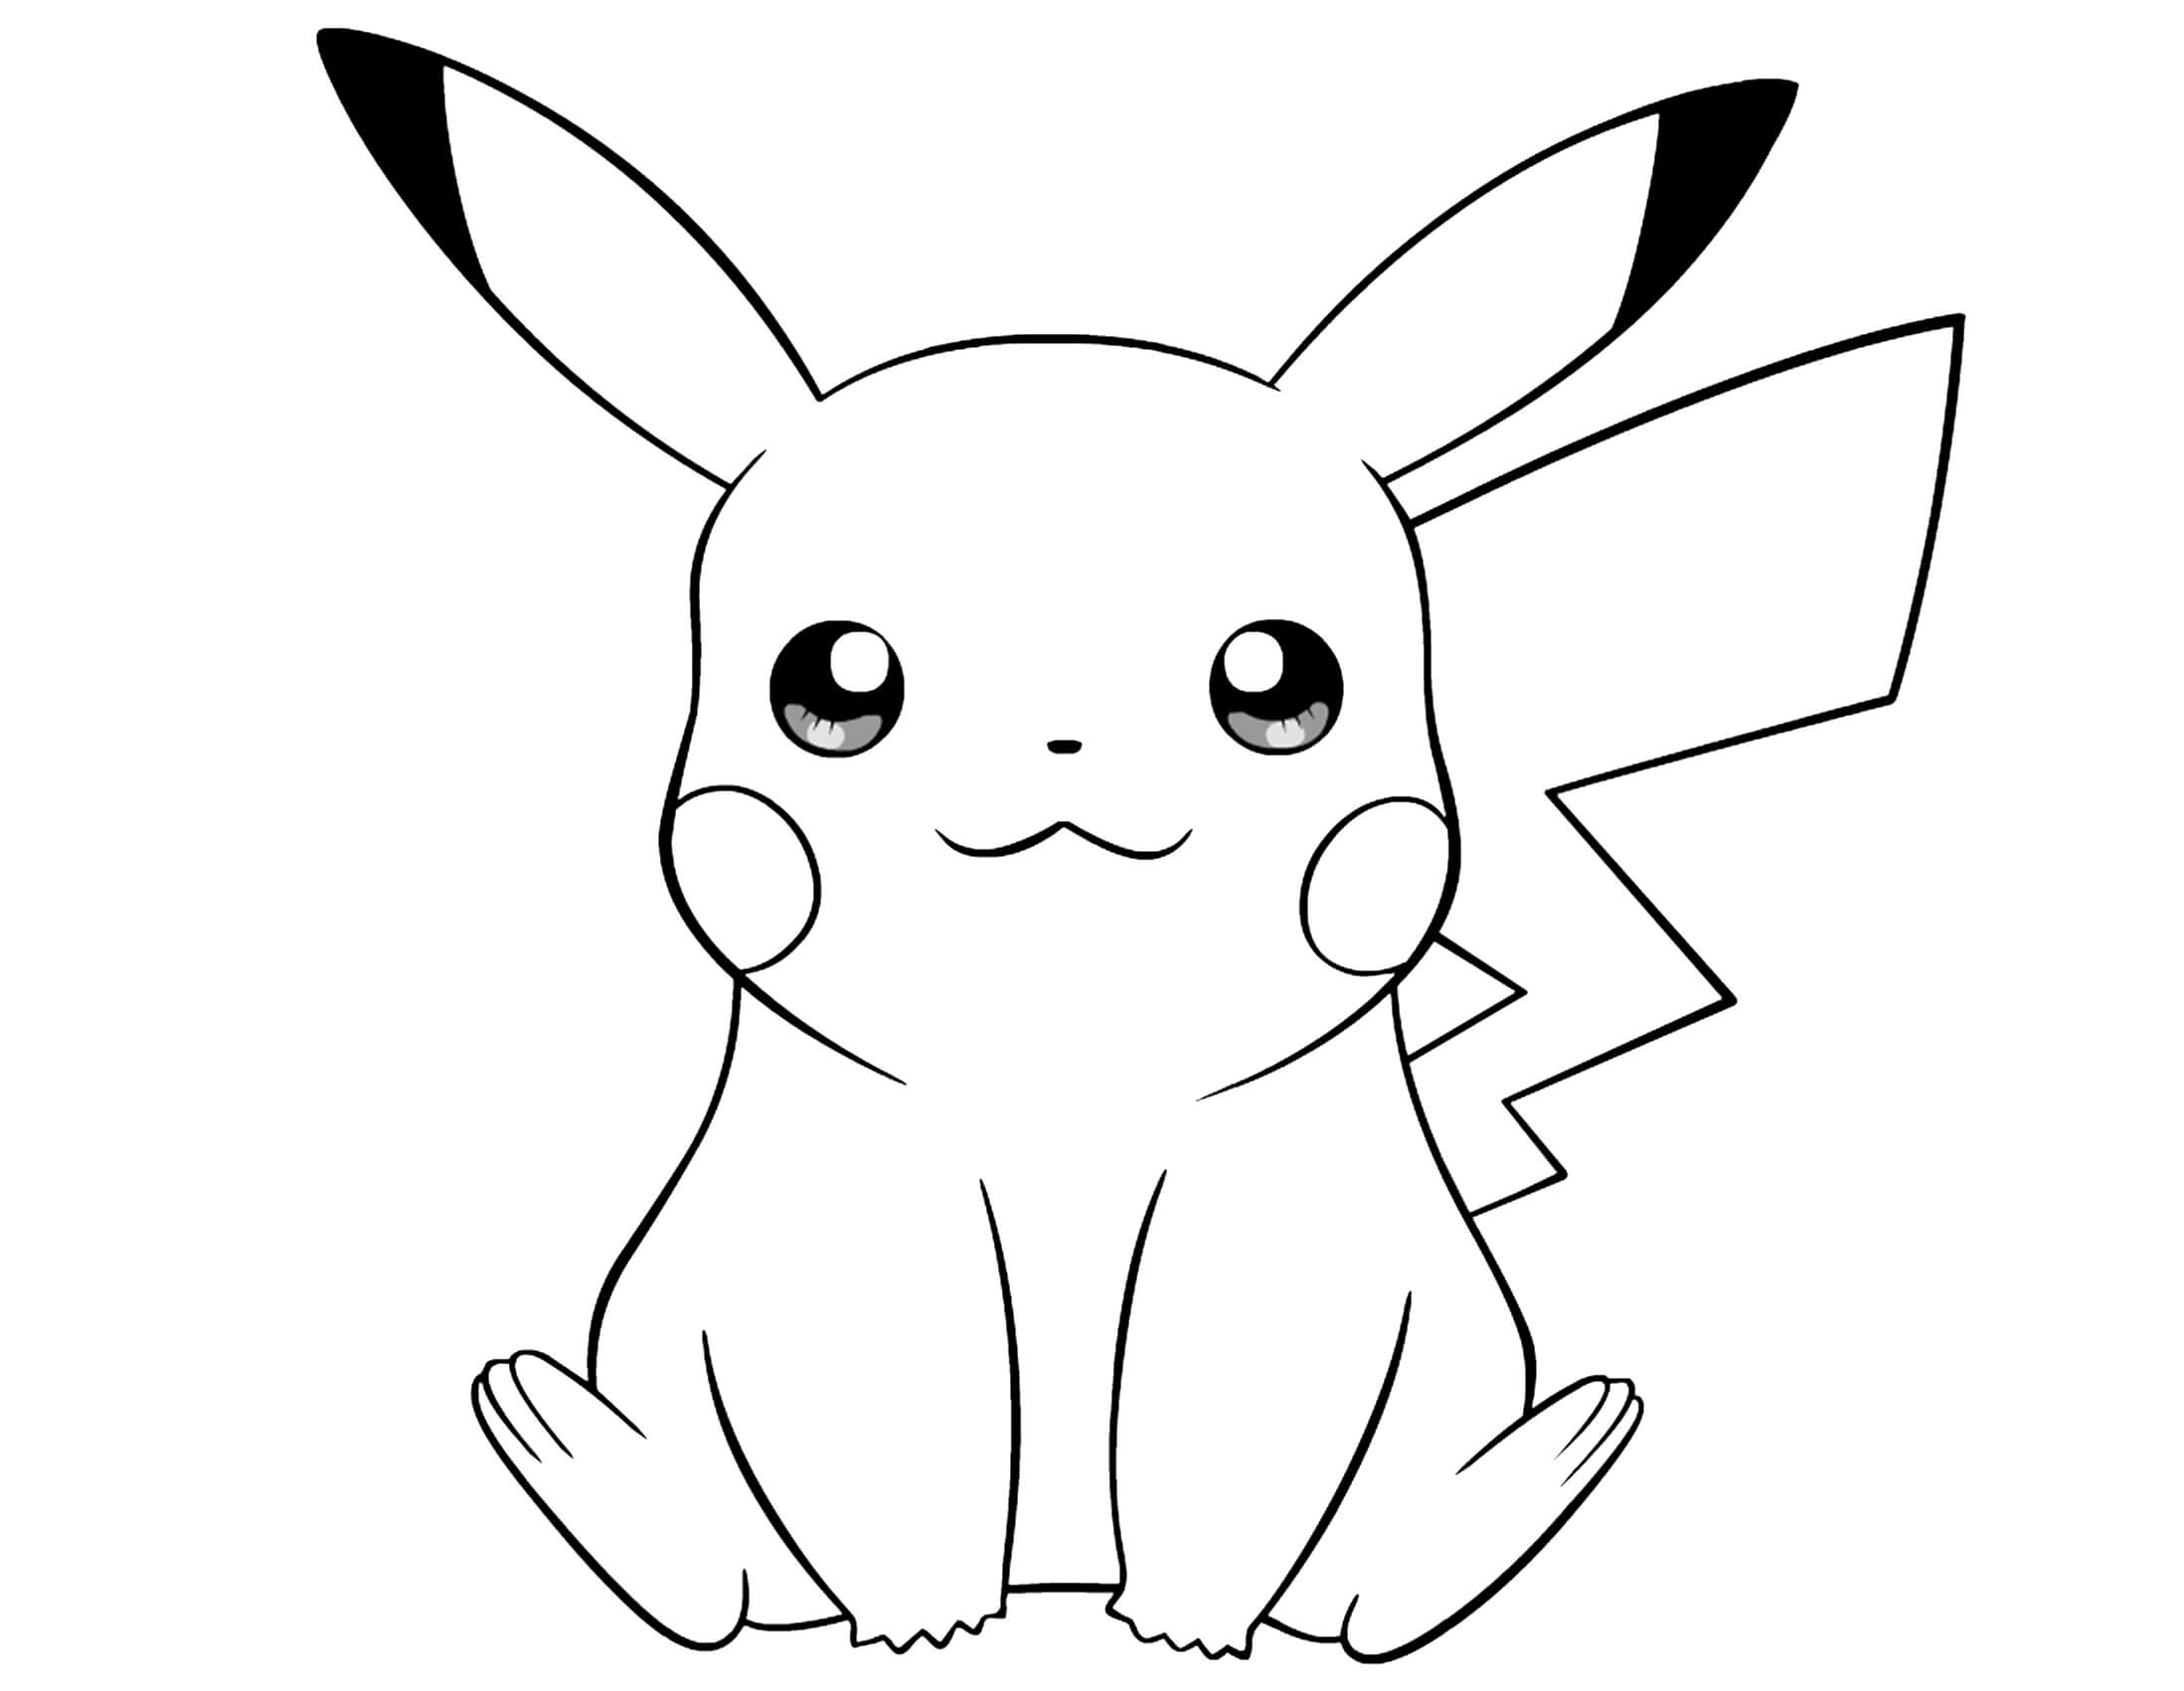 pikachu coloring pages to print